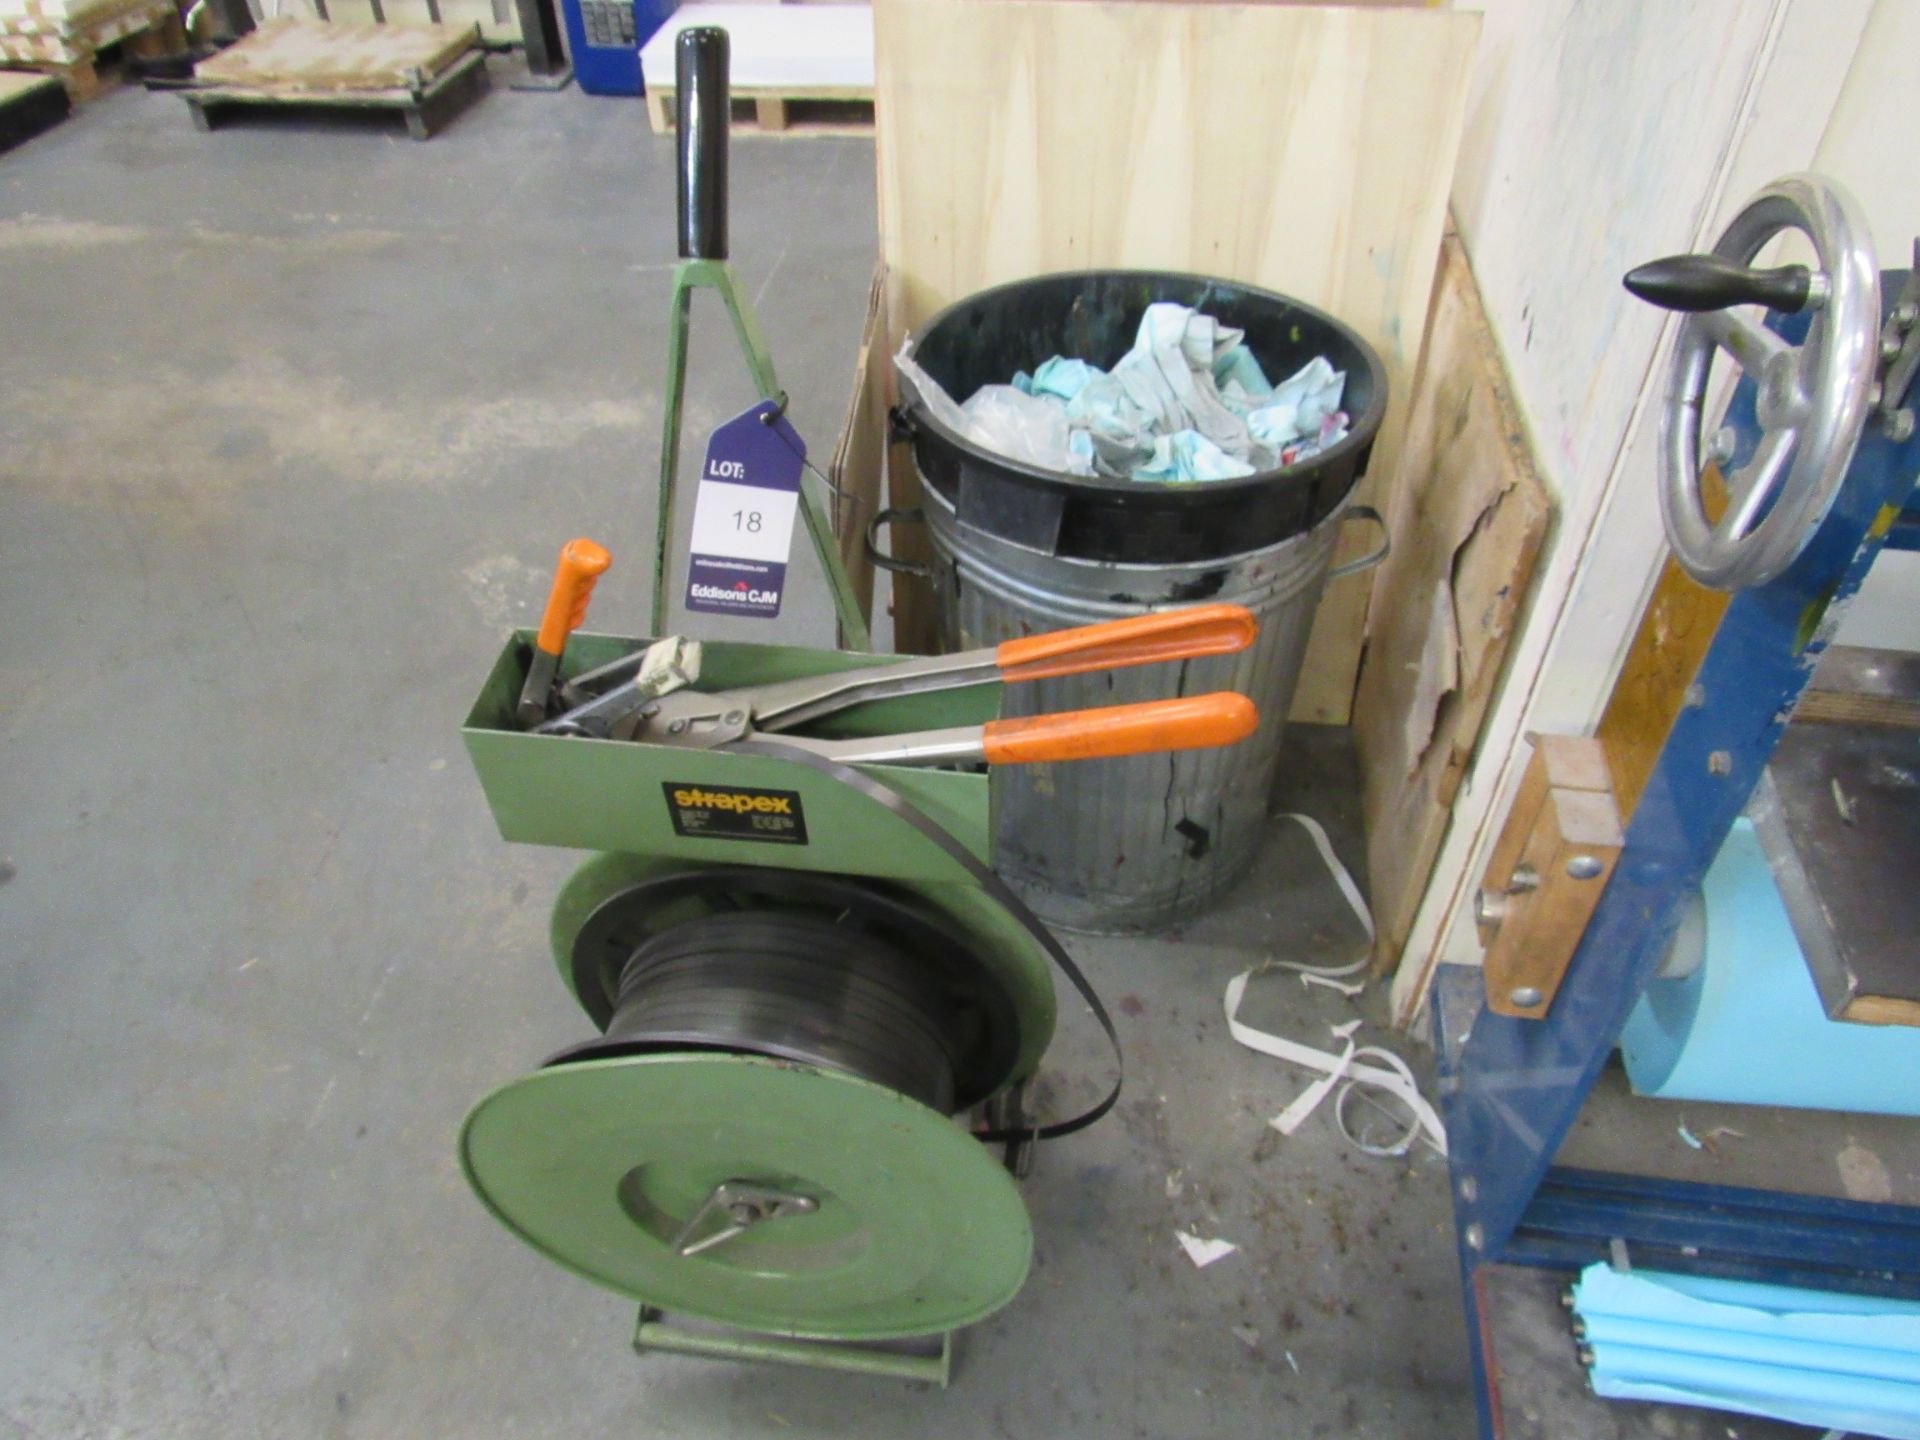 Strapex Banding and Strapping Trolley